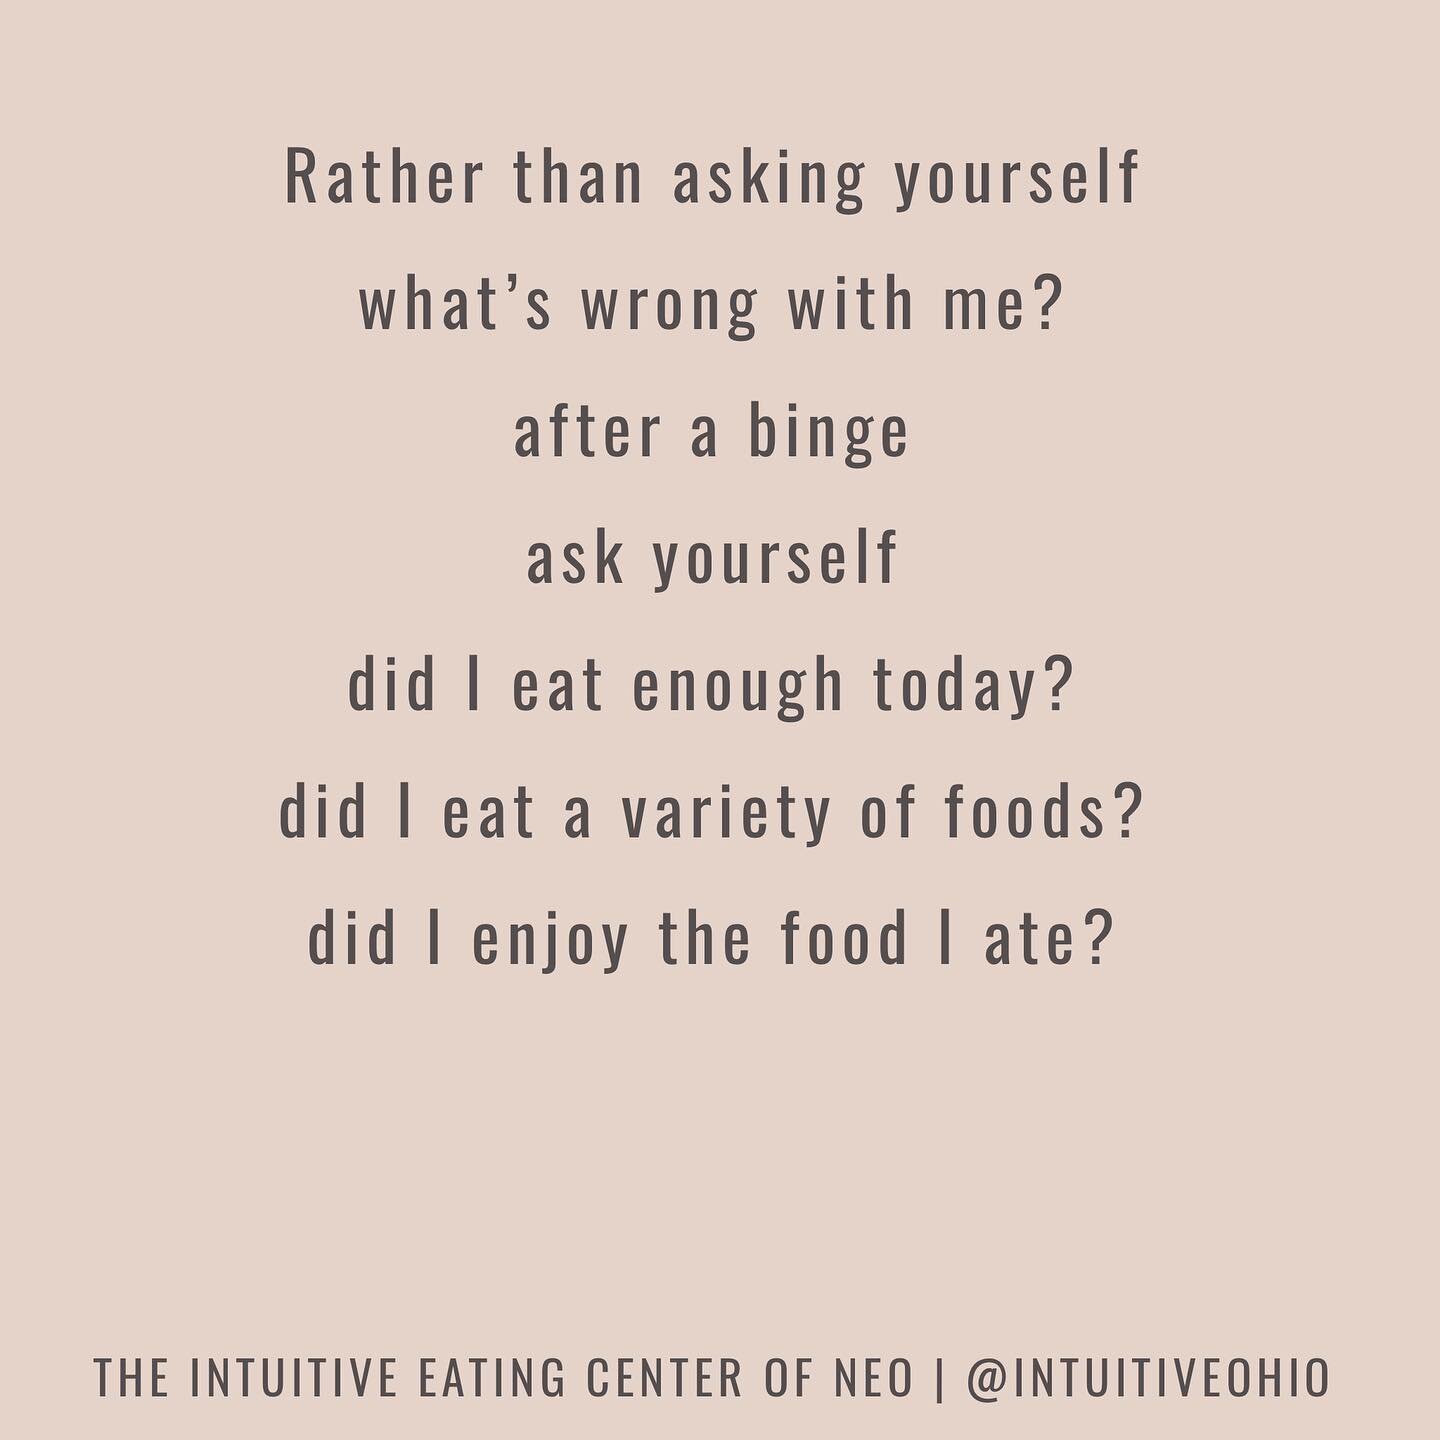 Curiosity, not judgement is the key to healing your relationship with food and body 🤍